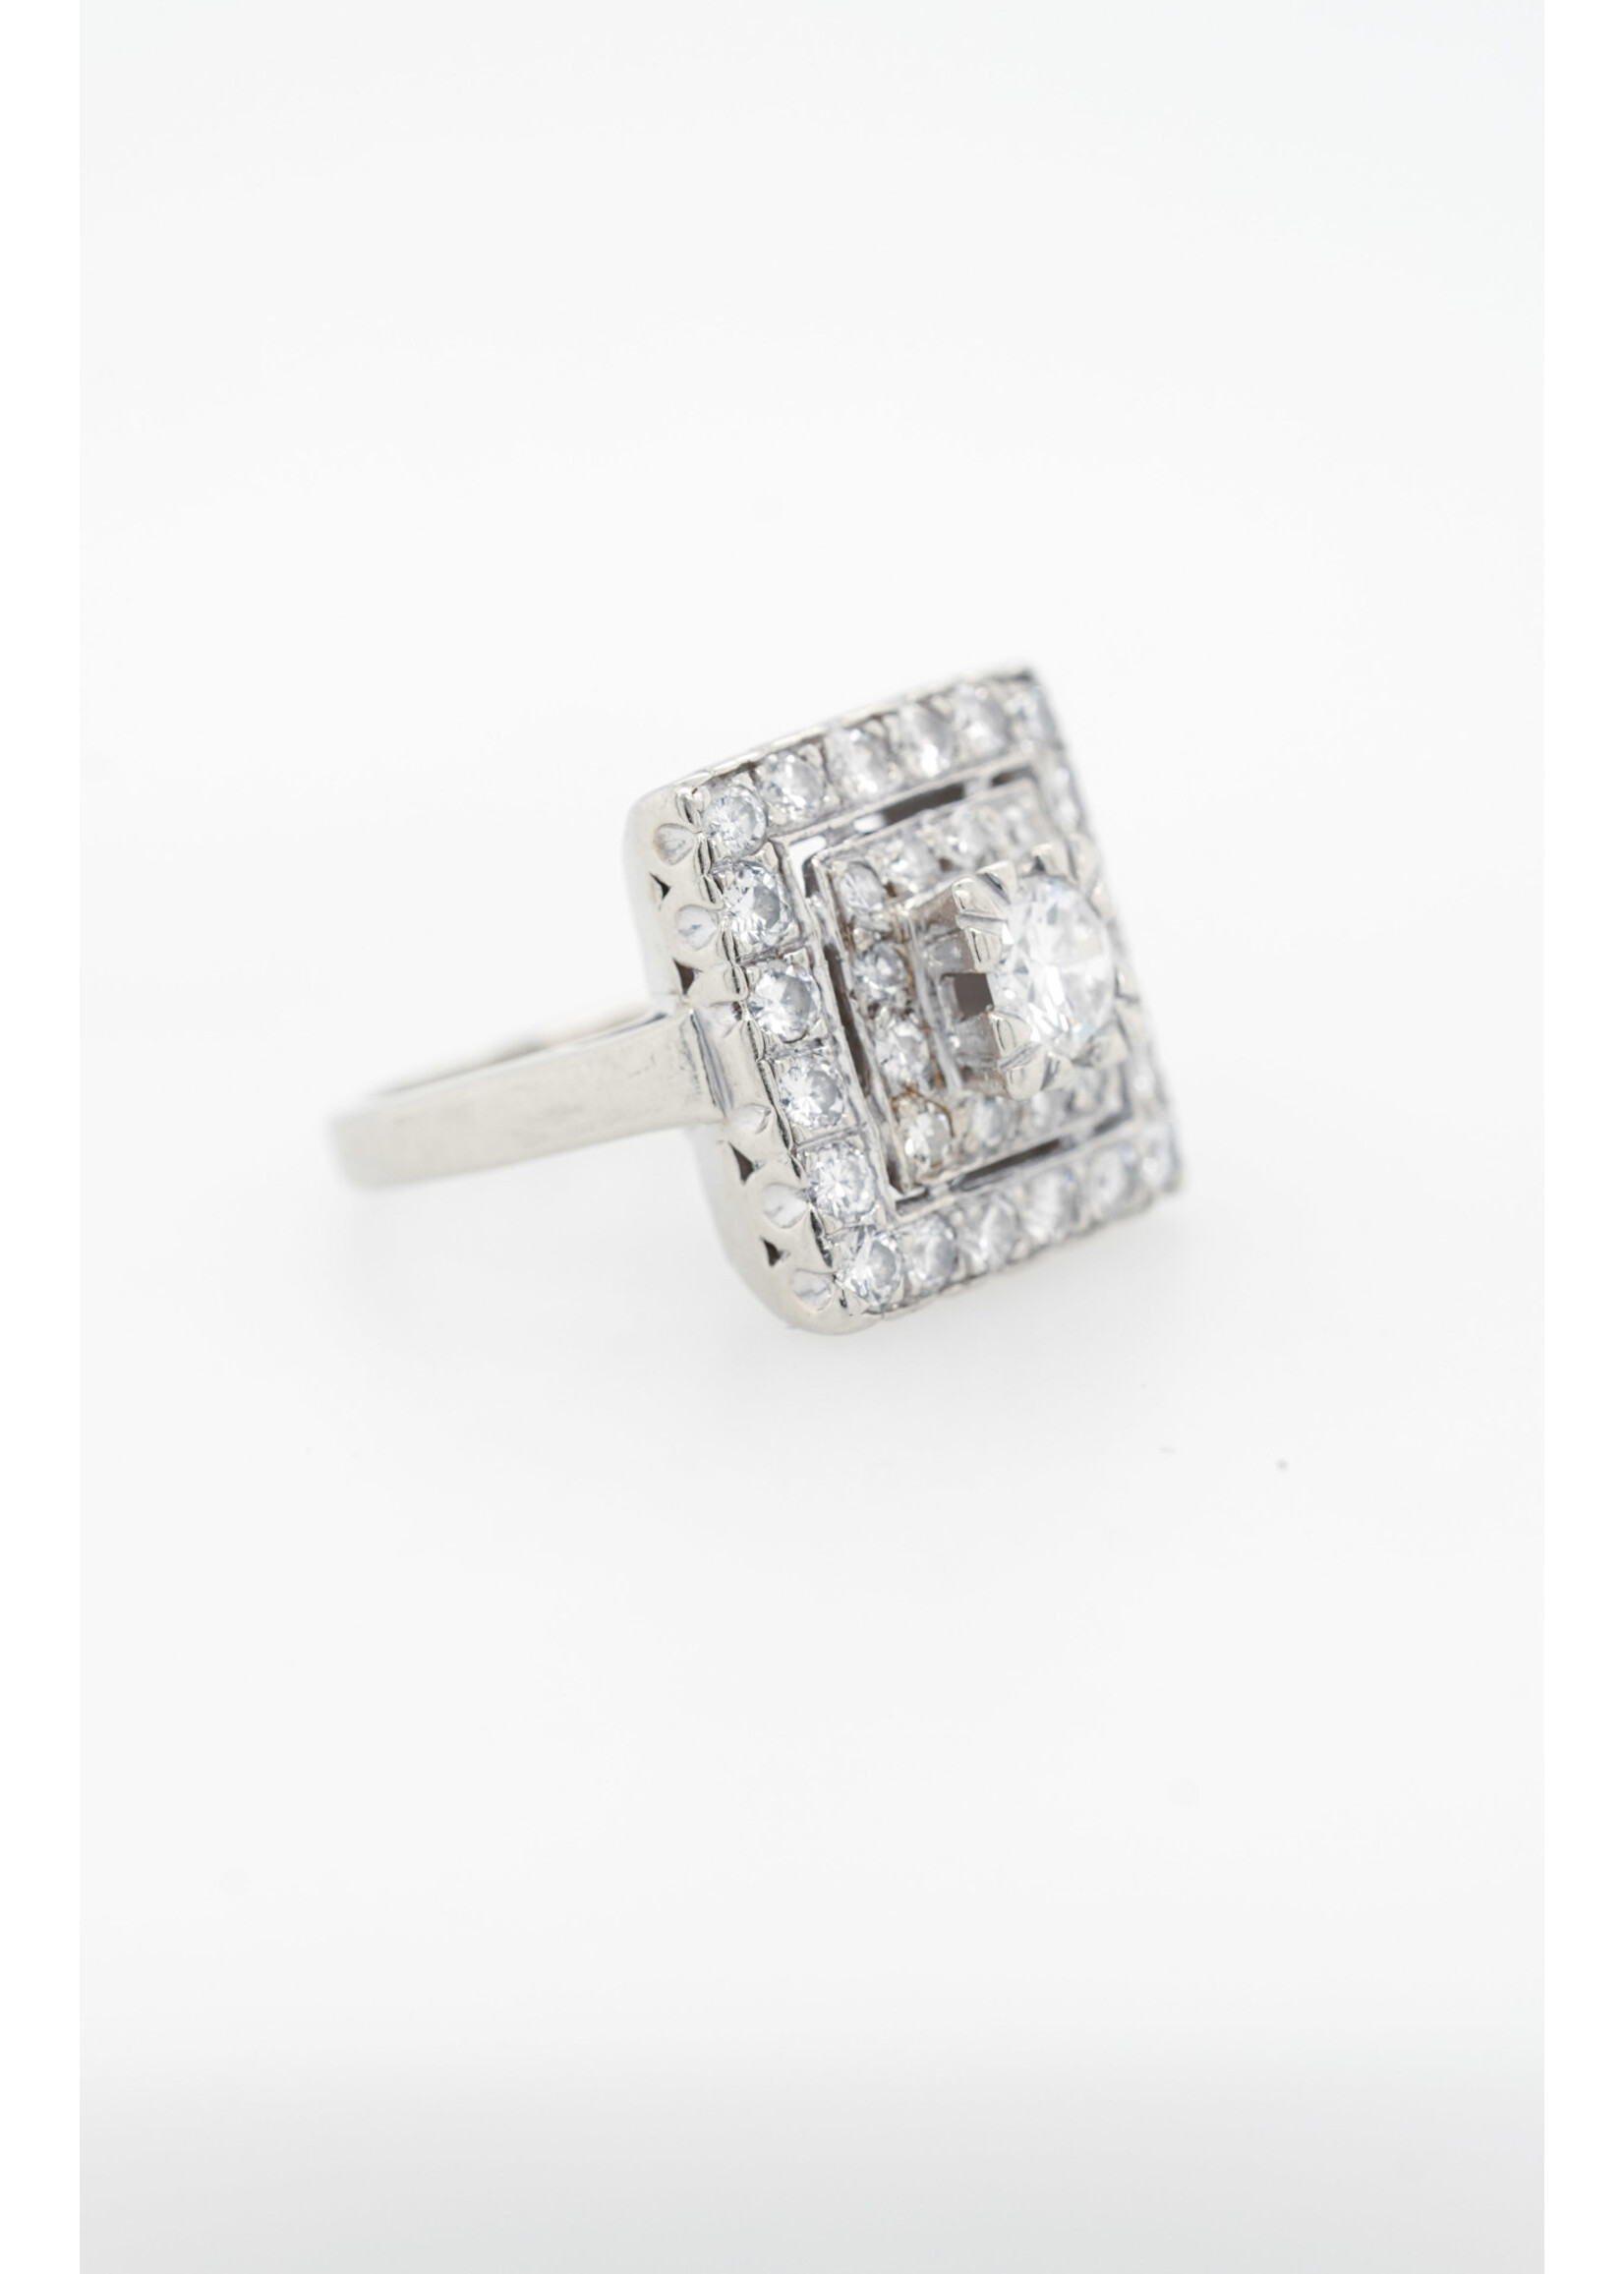 14KW 5.55g 1.70ctw (.54ctr) I/SI2 Transitional Cut Diamond Halo Antique Ring (size 3.5)